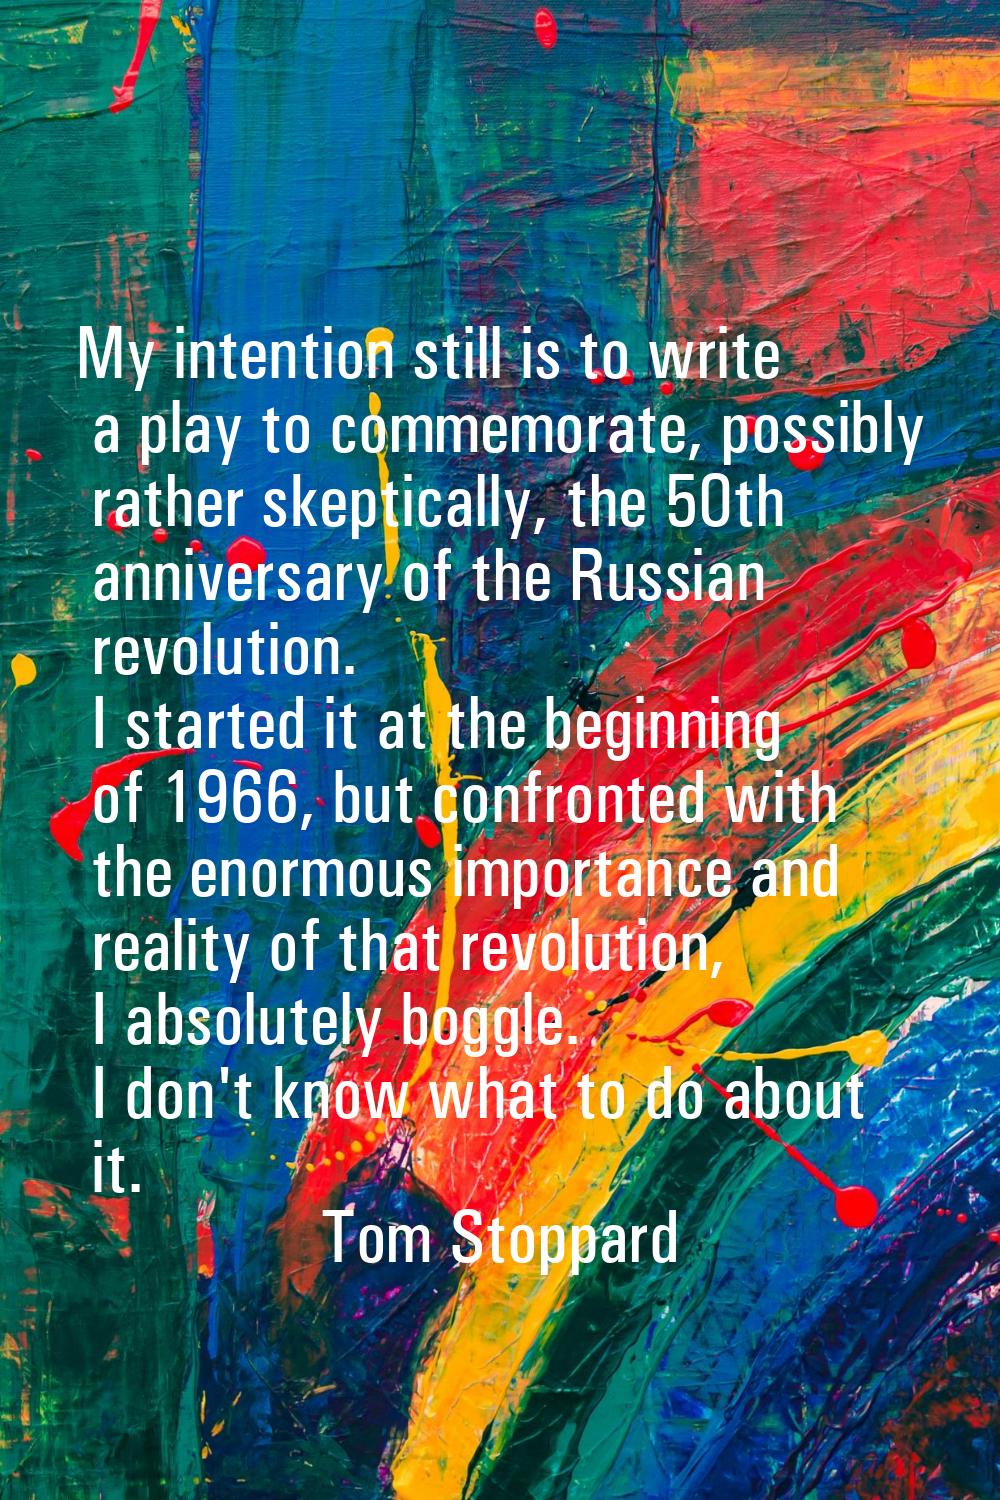 My intention still is to write a play to commemorate, possibly rather skeptically, the 50th anniver